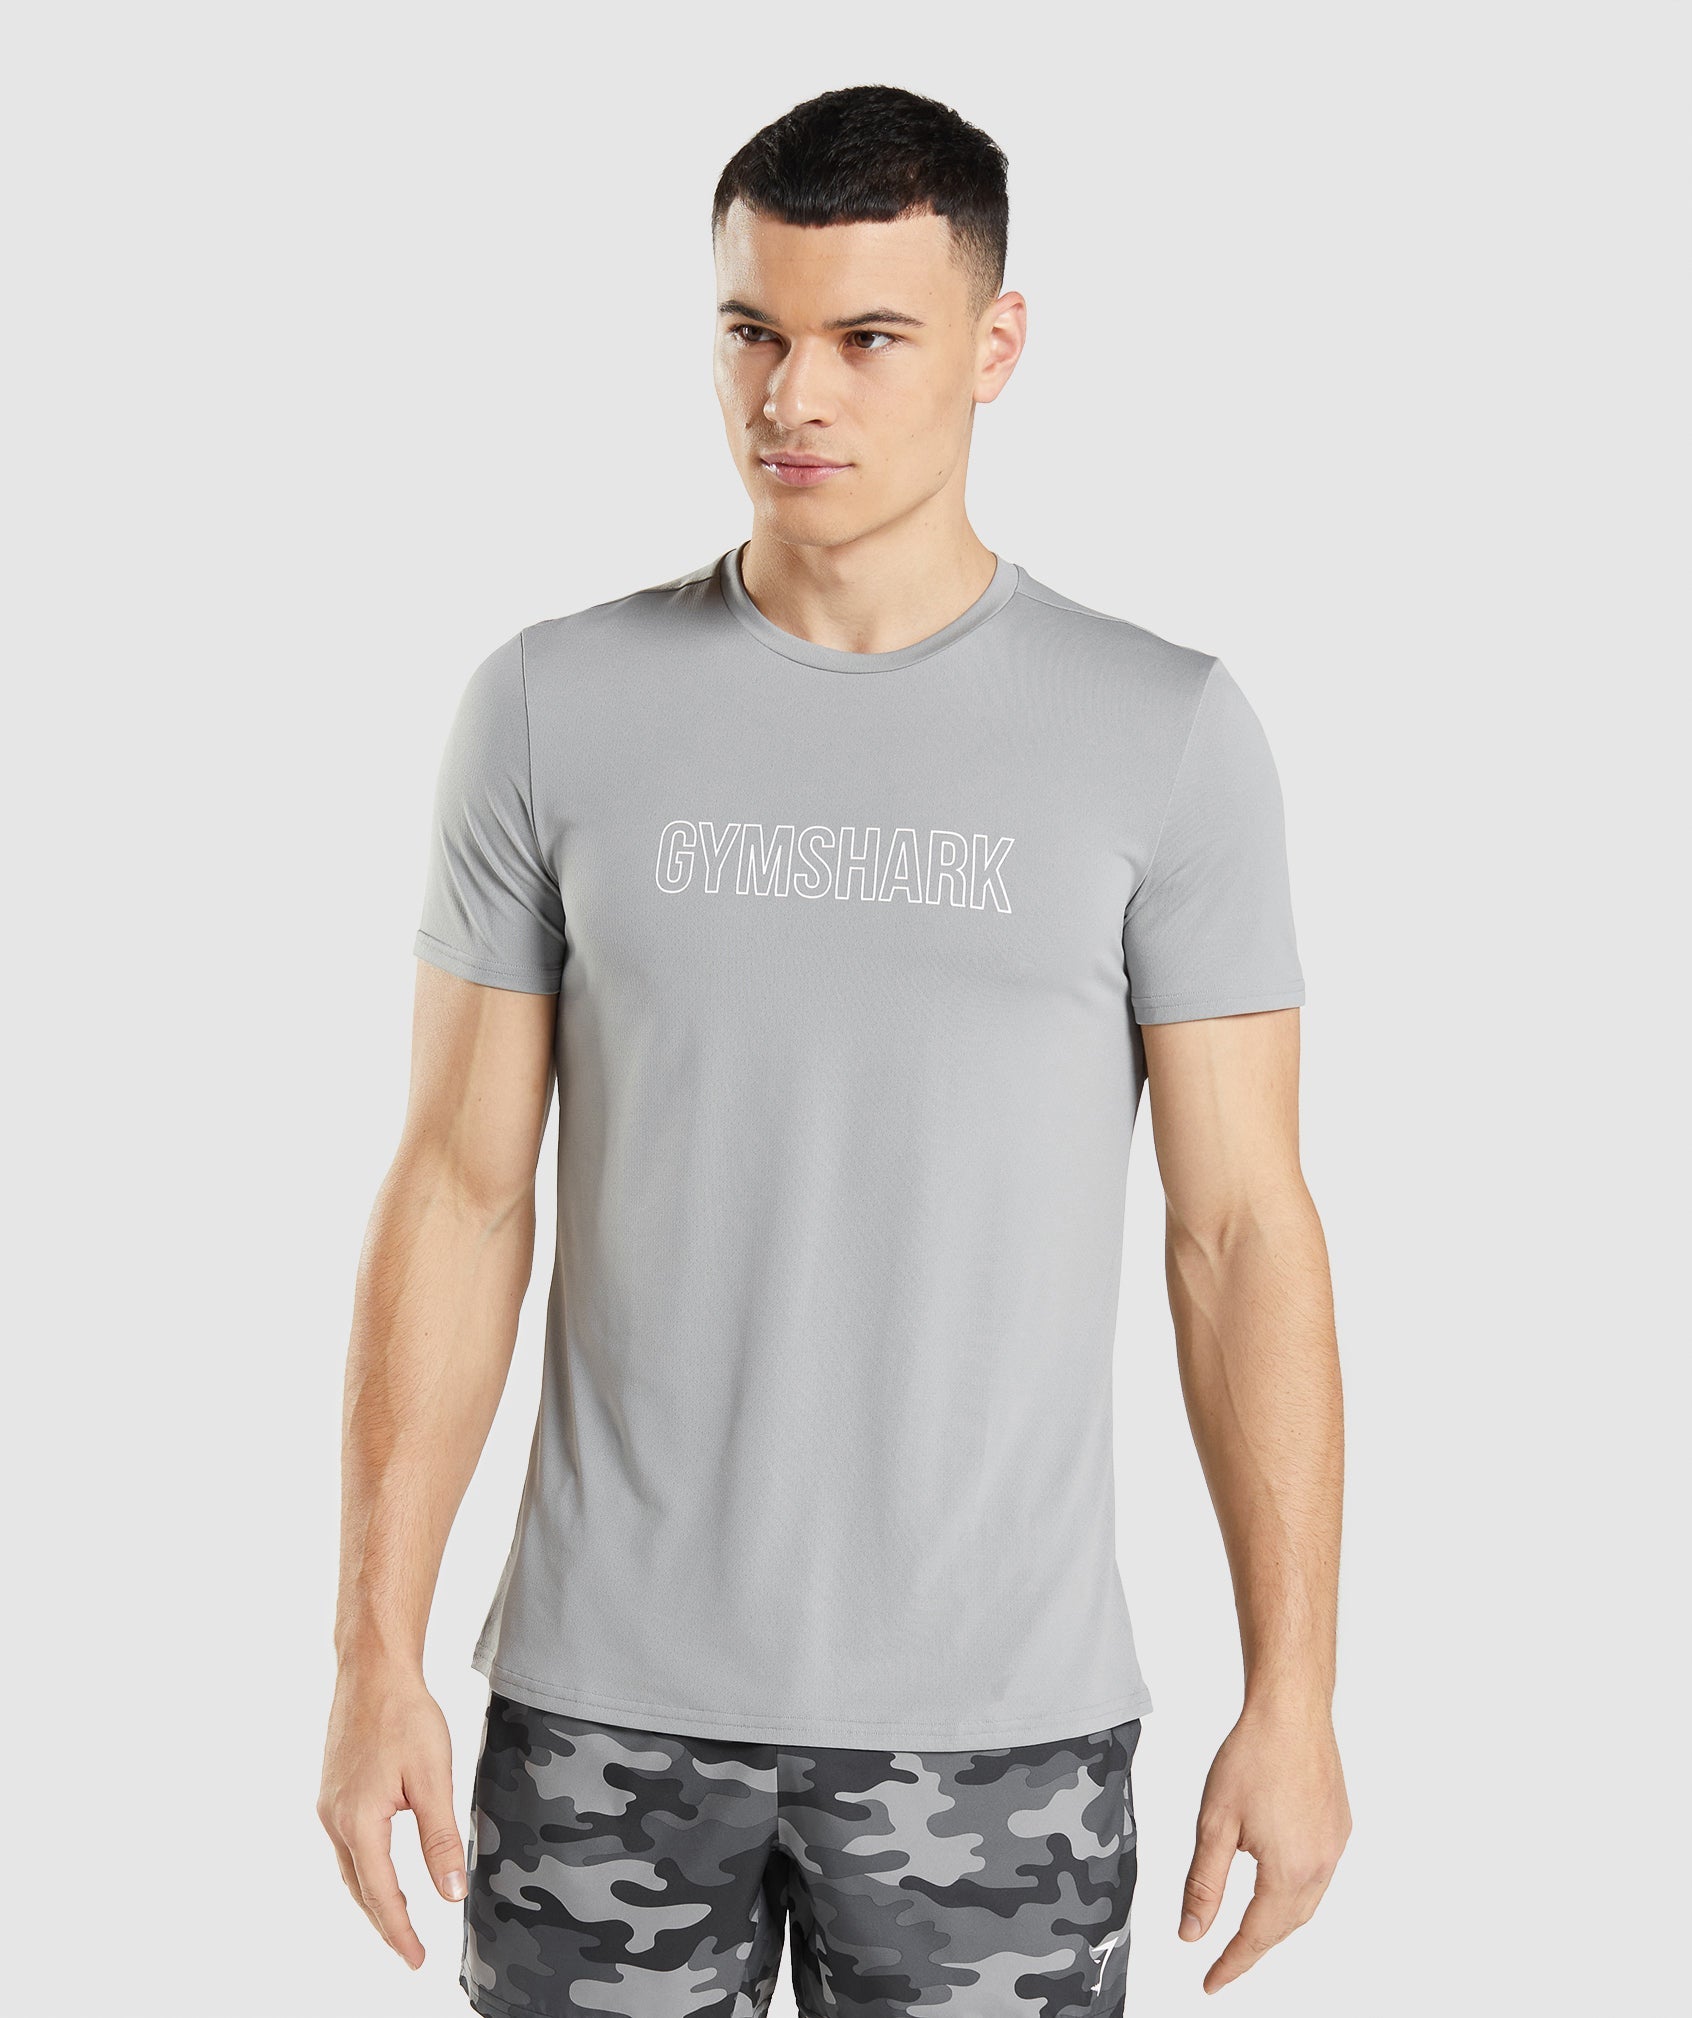 Arrival Graphic T-Shirt in Smokey Grey - view 1